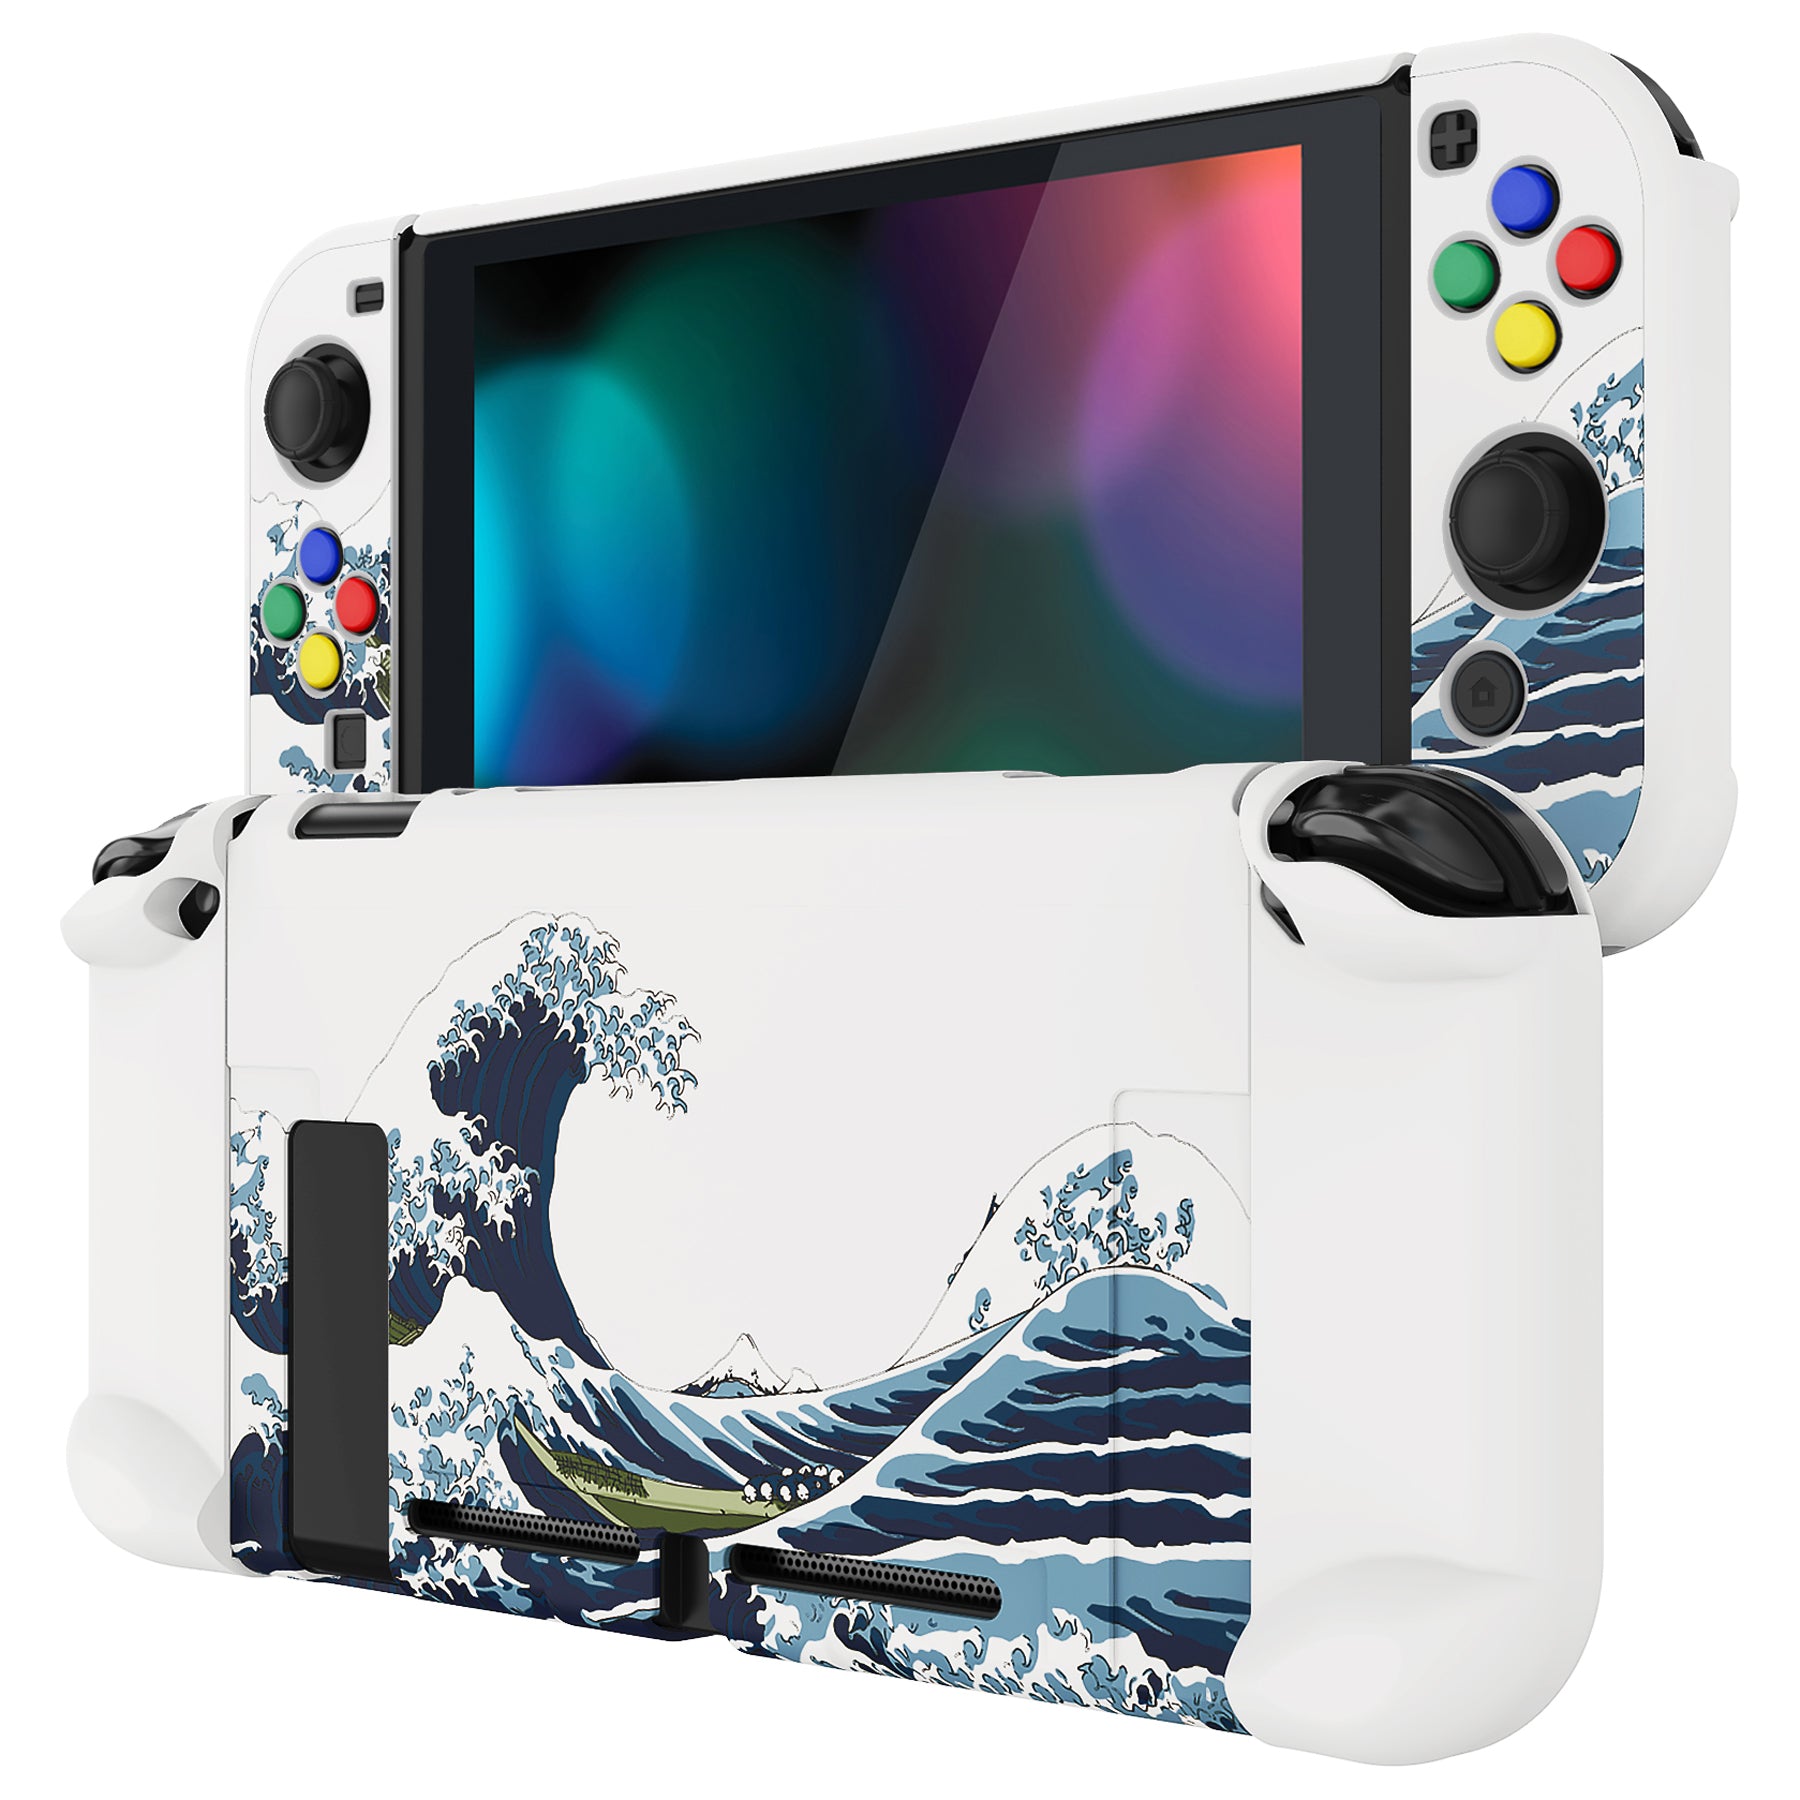 PlayVital Back Cover for Nintendo Switch, NS Joycon Handheld Controller Protector Hard Shell, Dockable Protective Case with Colorful ABXY Direction Button Caps - The Great Wave - NTT121 PlayVital